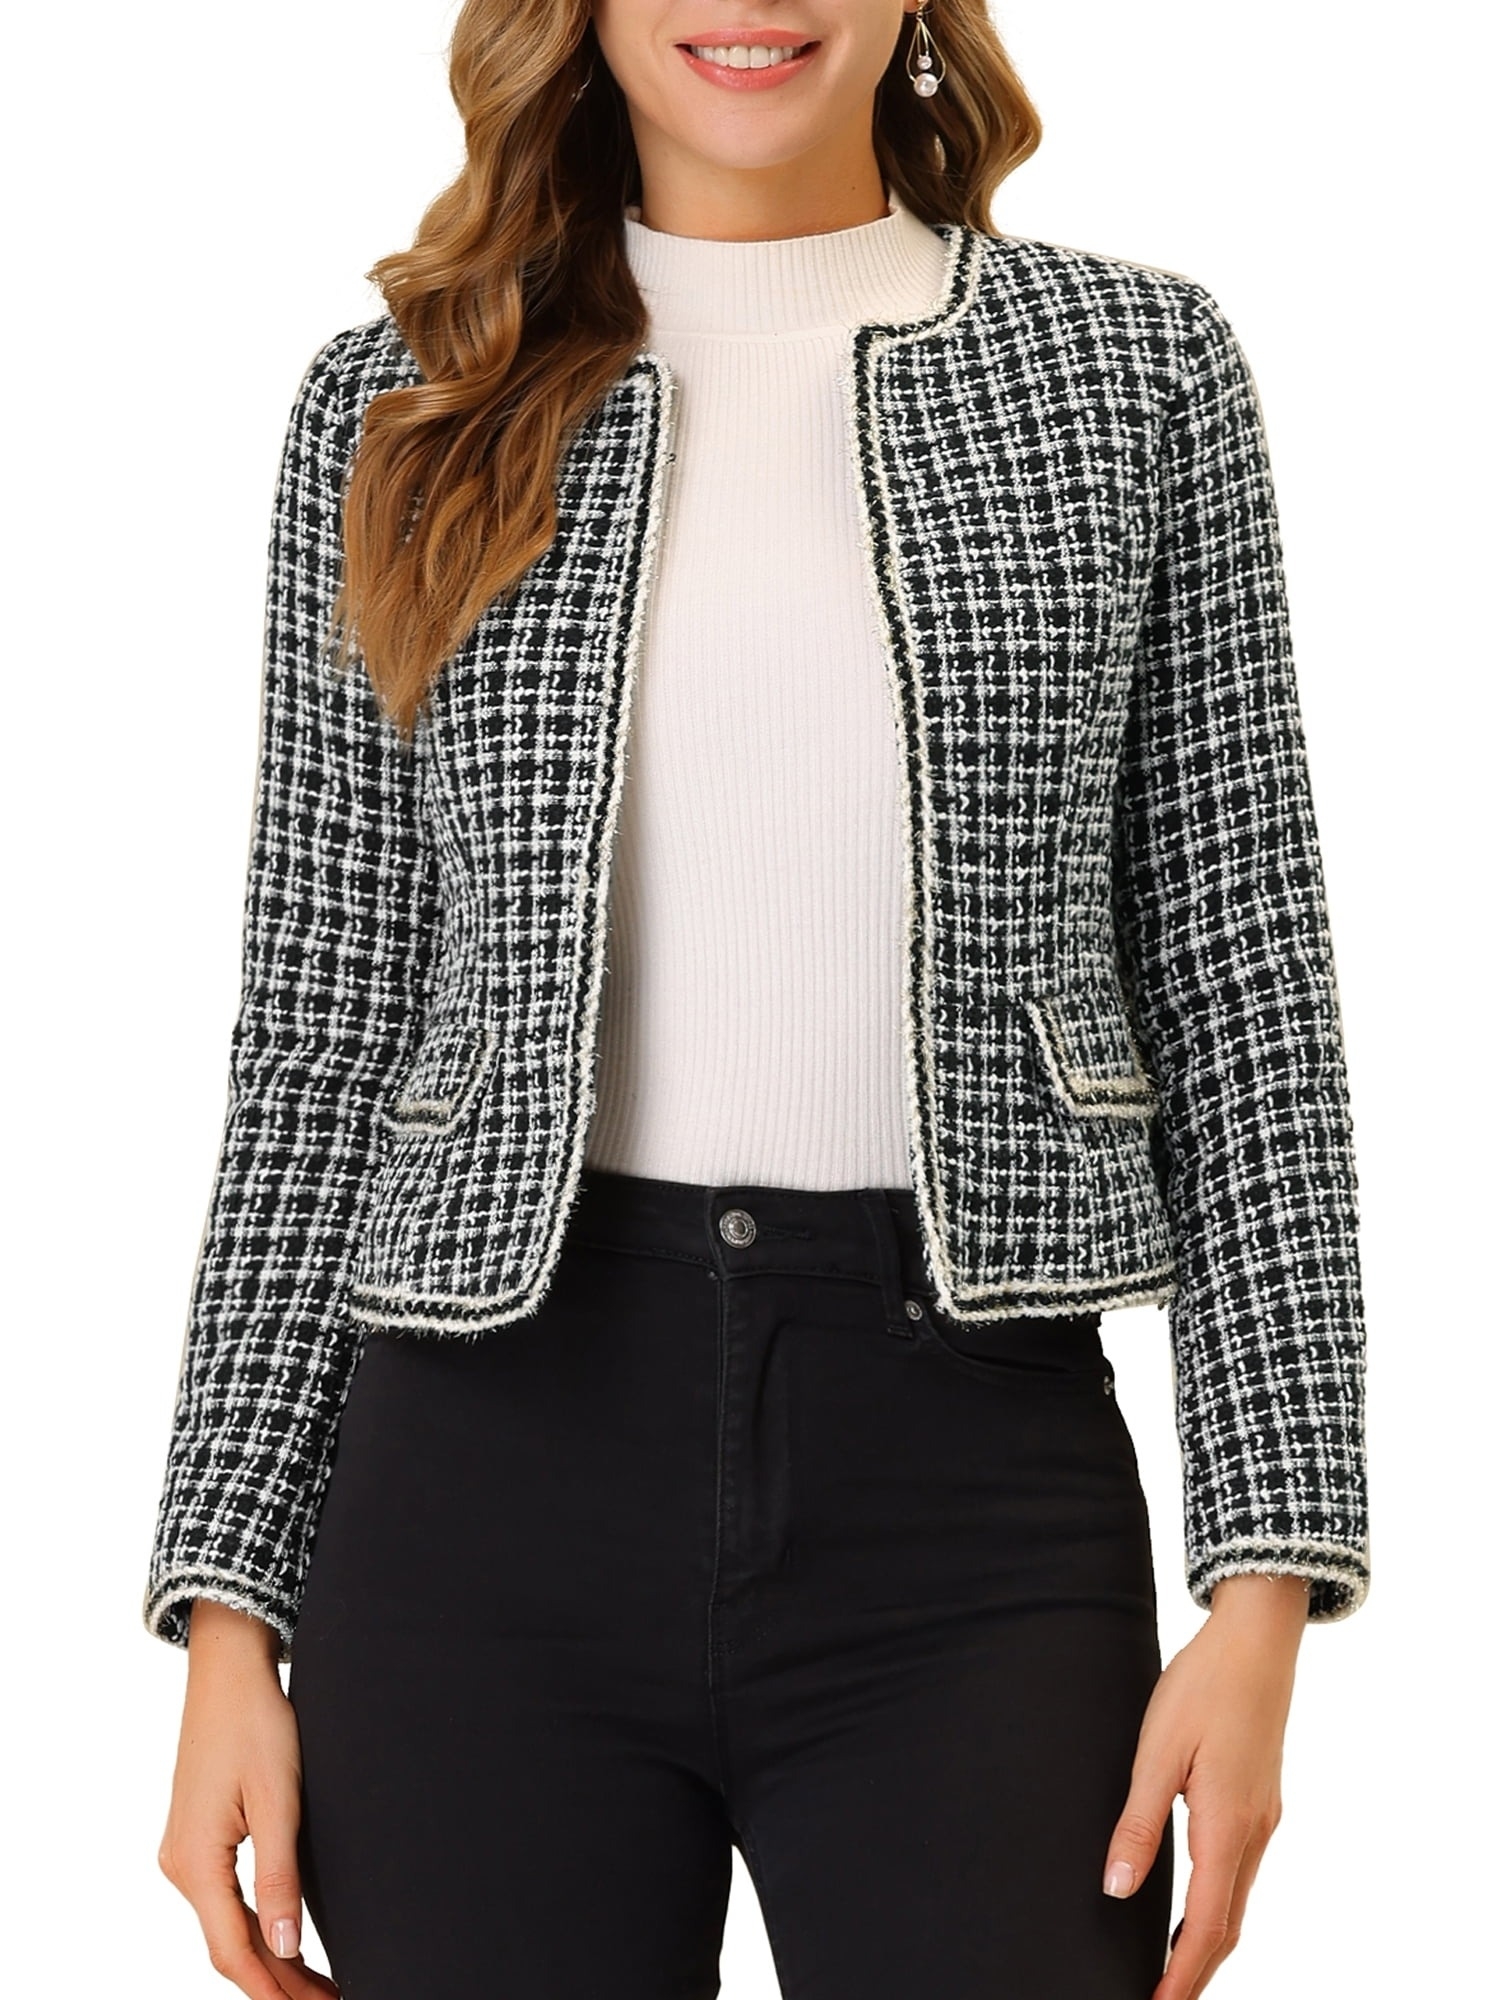 model wearing a houndstooth jacket and black jeans